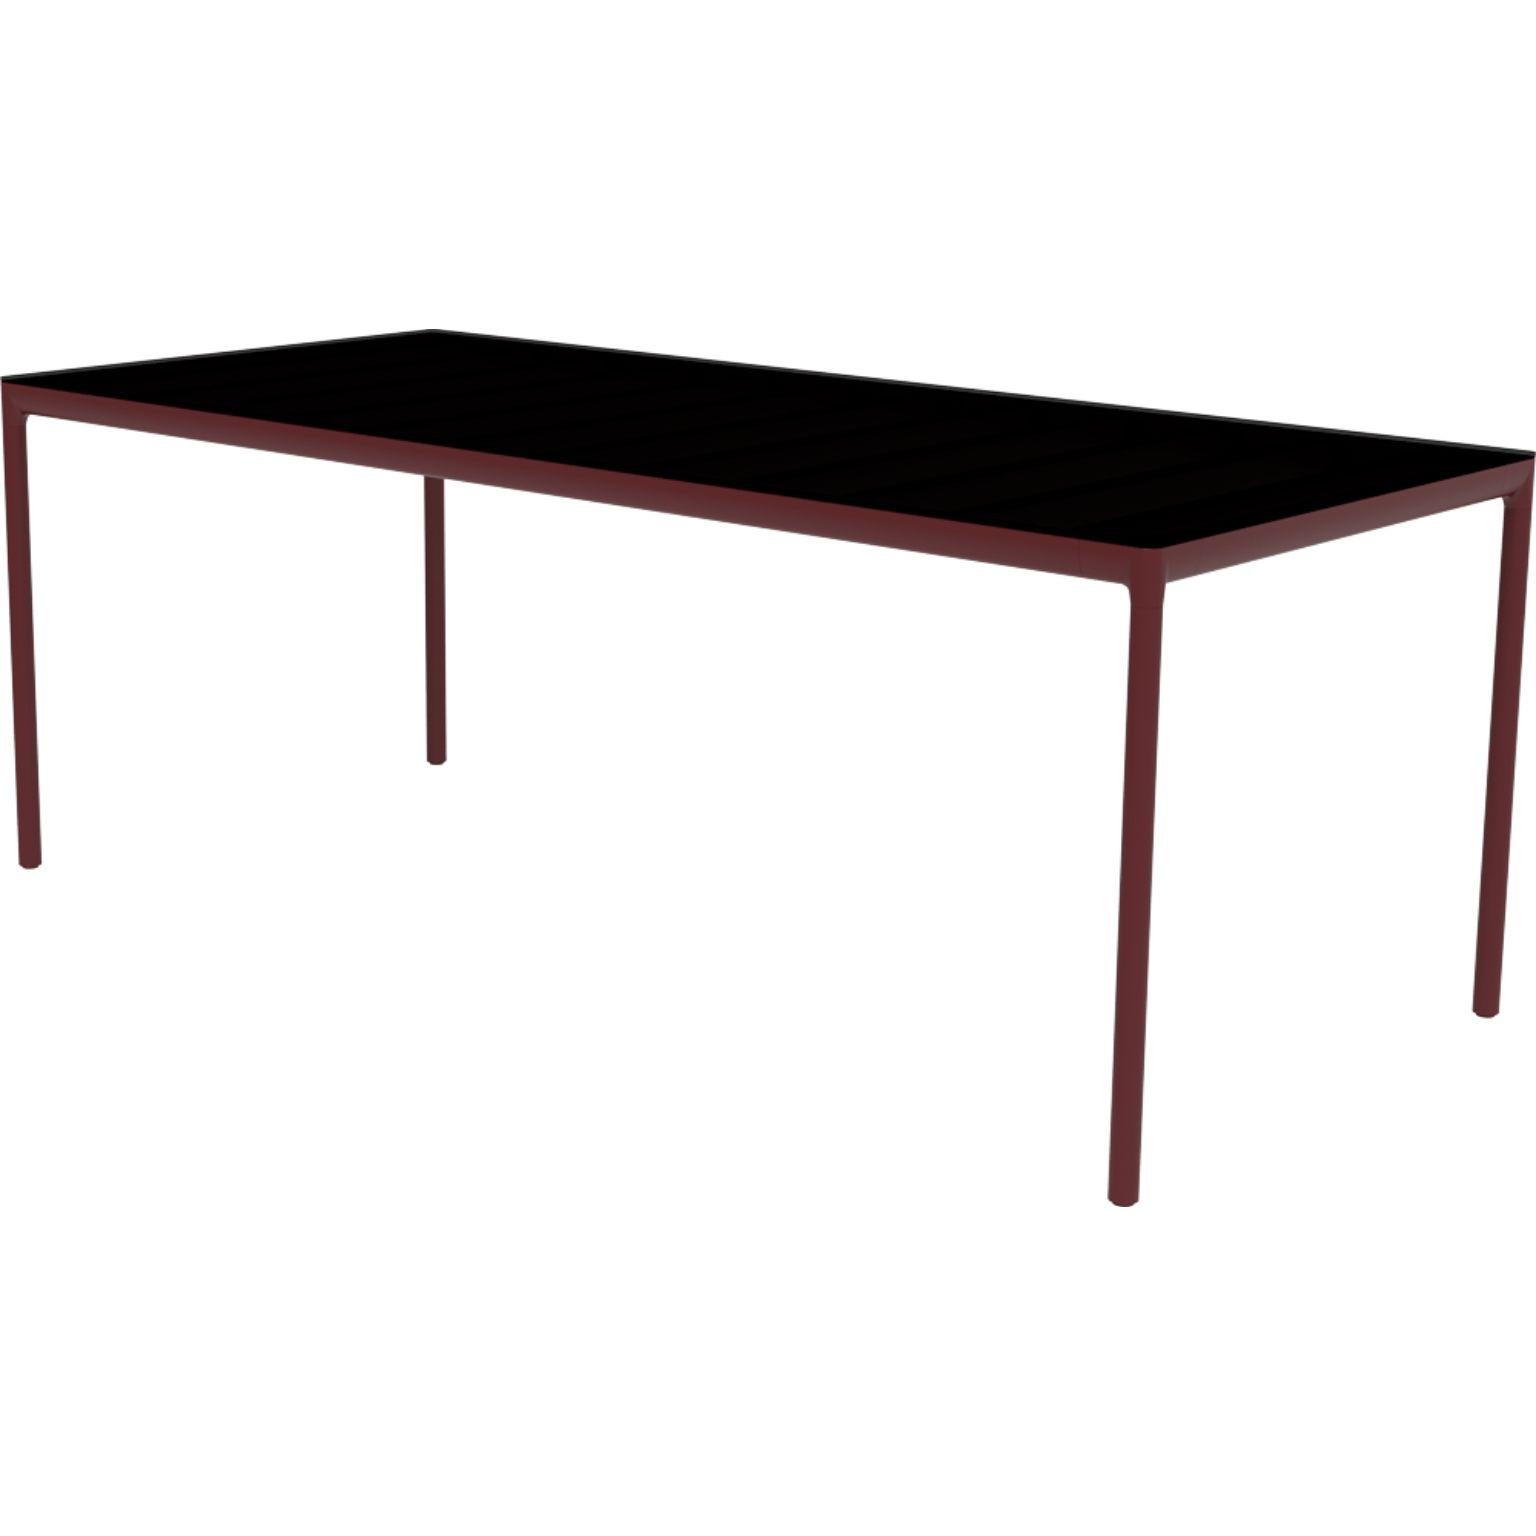 Ribbons Burgundy 200 coffee table by MOWEE
Dimensions: D 90 x W 200 x H 75 cm.
Material: Aluminum and HPL top.
Weight: 25 kg.
Also available in different colors and finishes. (HPL Black Edge or Neolith top).

An unmistakable collection for its